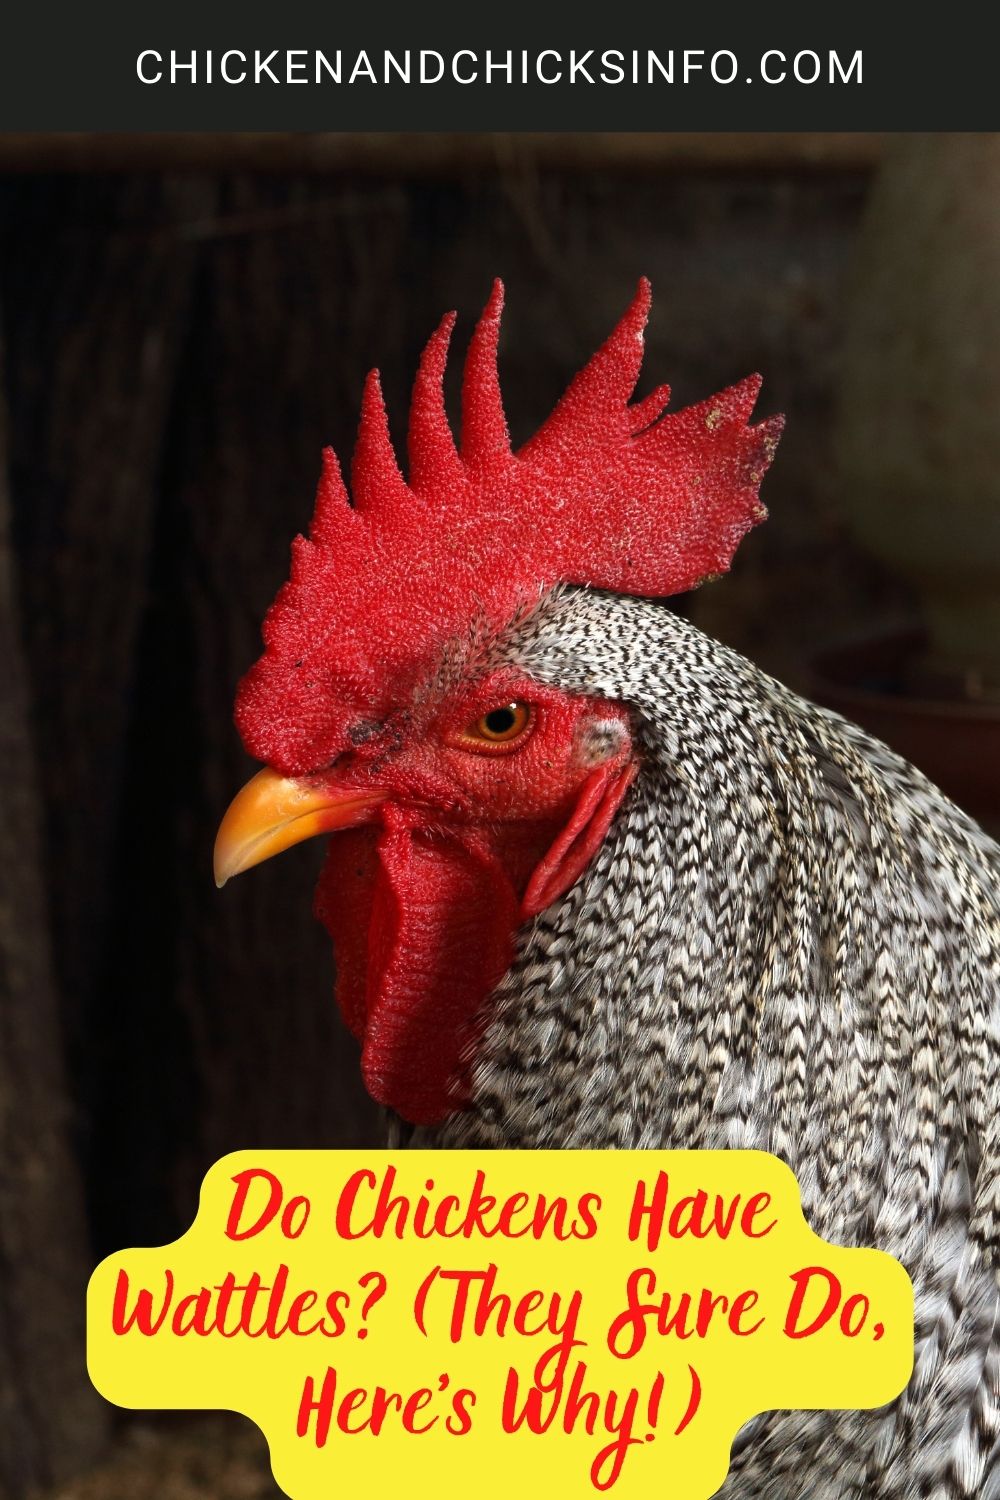 Do Chickens Have Wattles? (They Sure Do, Here's Why!) poster.
